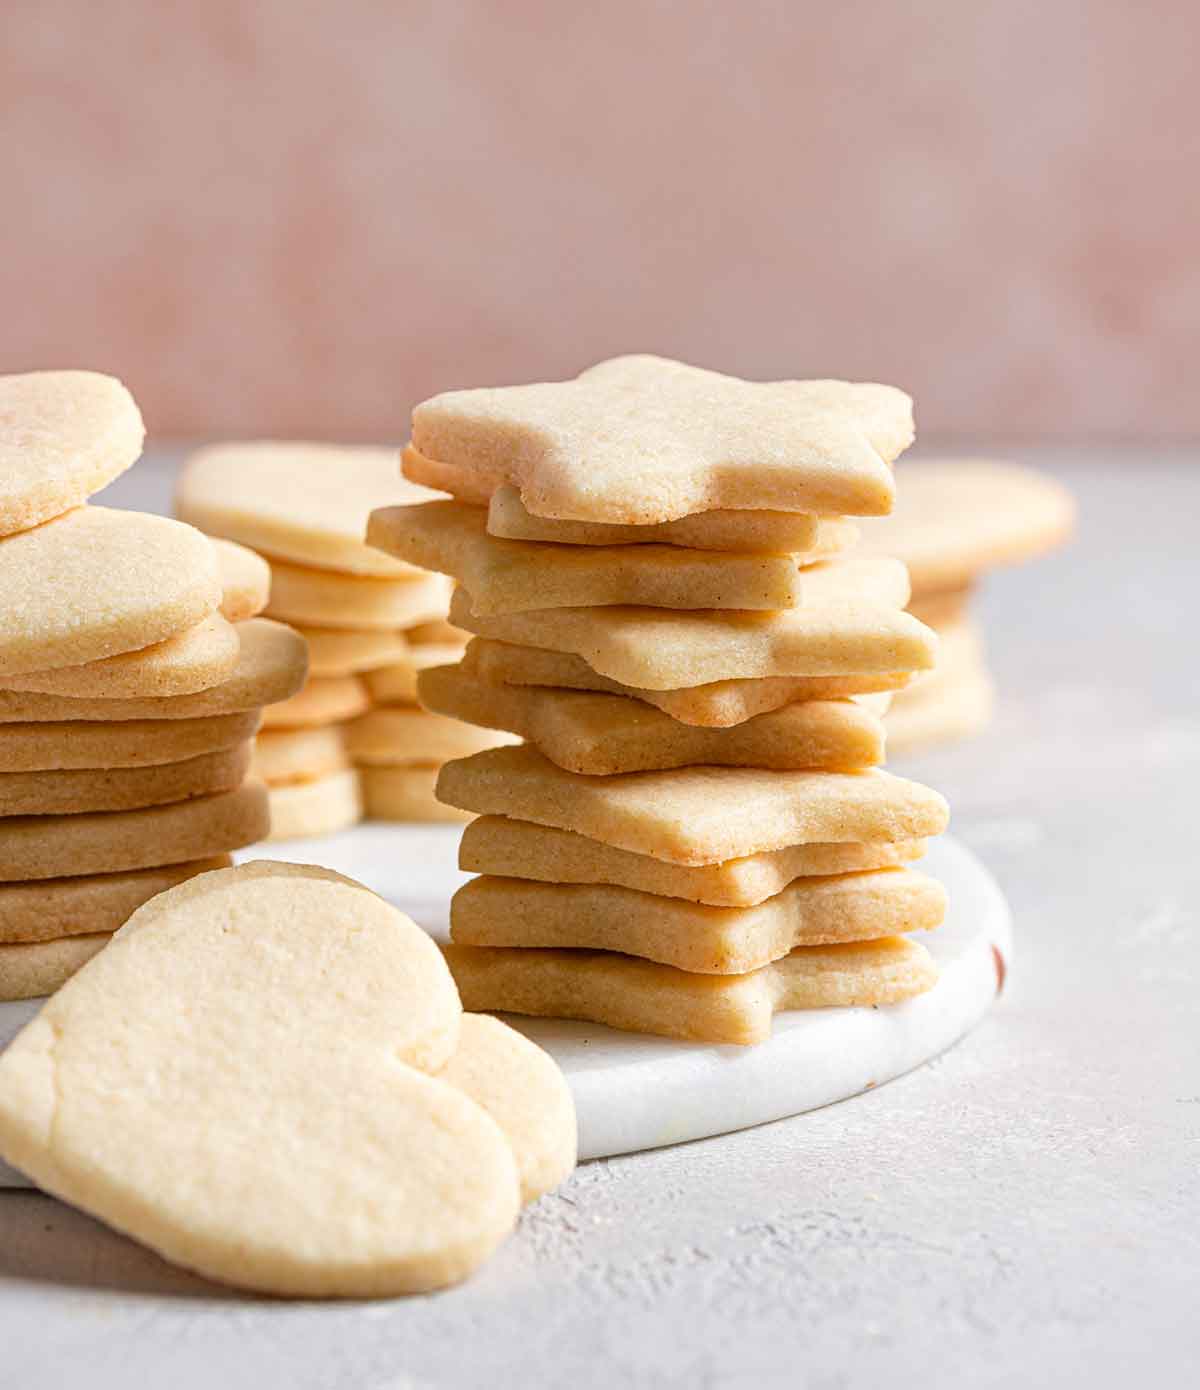 Heart and star-shaped cut out cookies plain and undecorated, in stacks on a white platter.